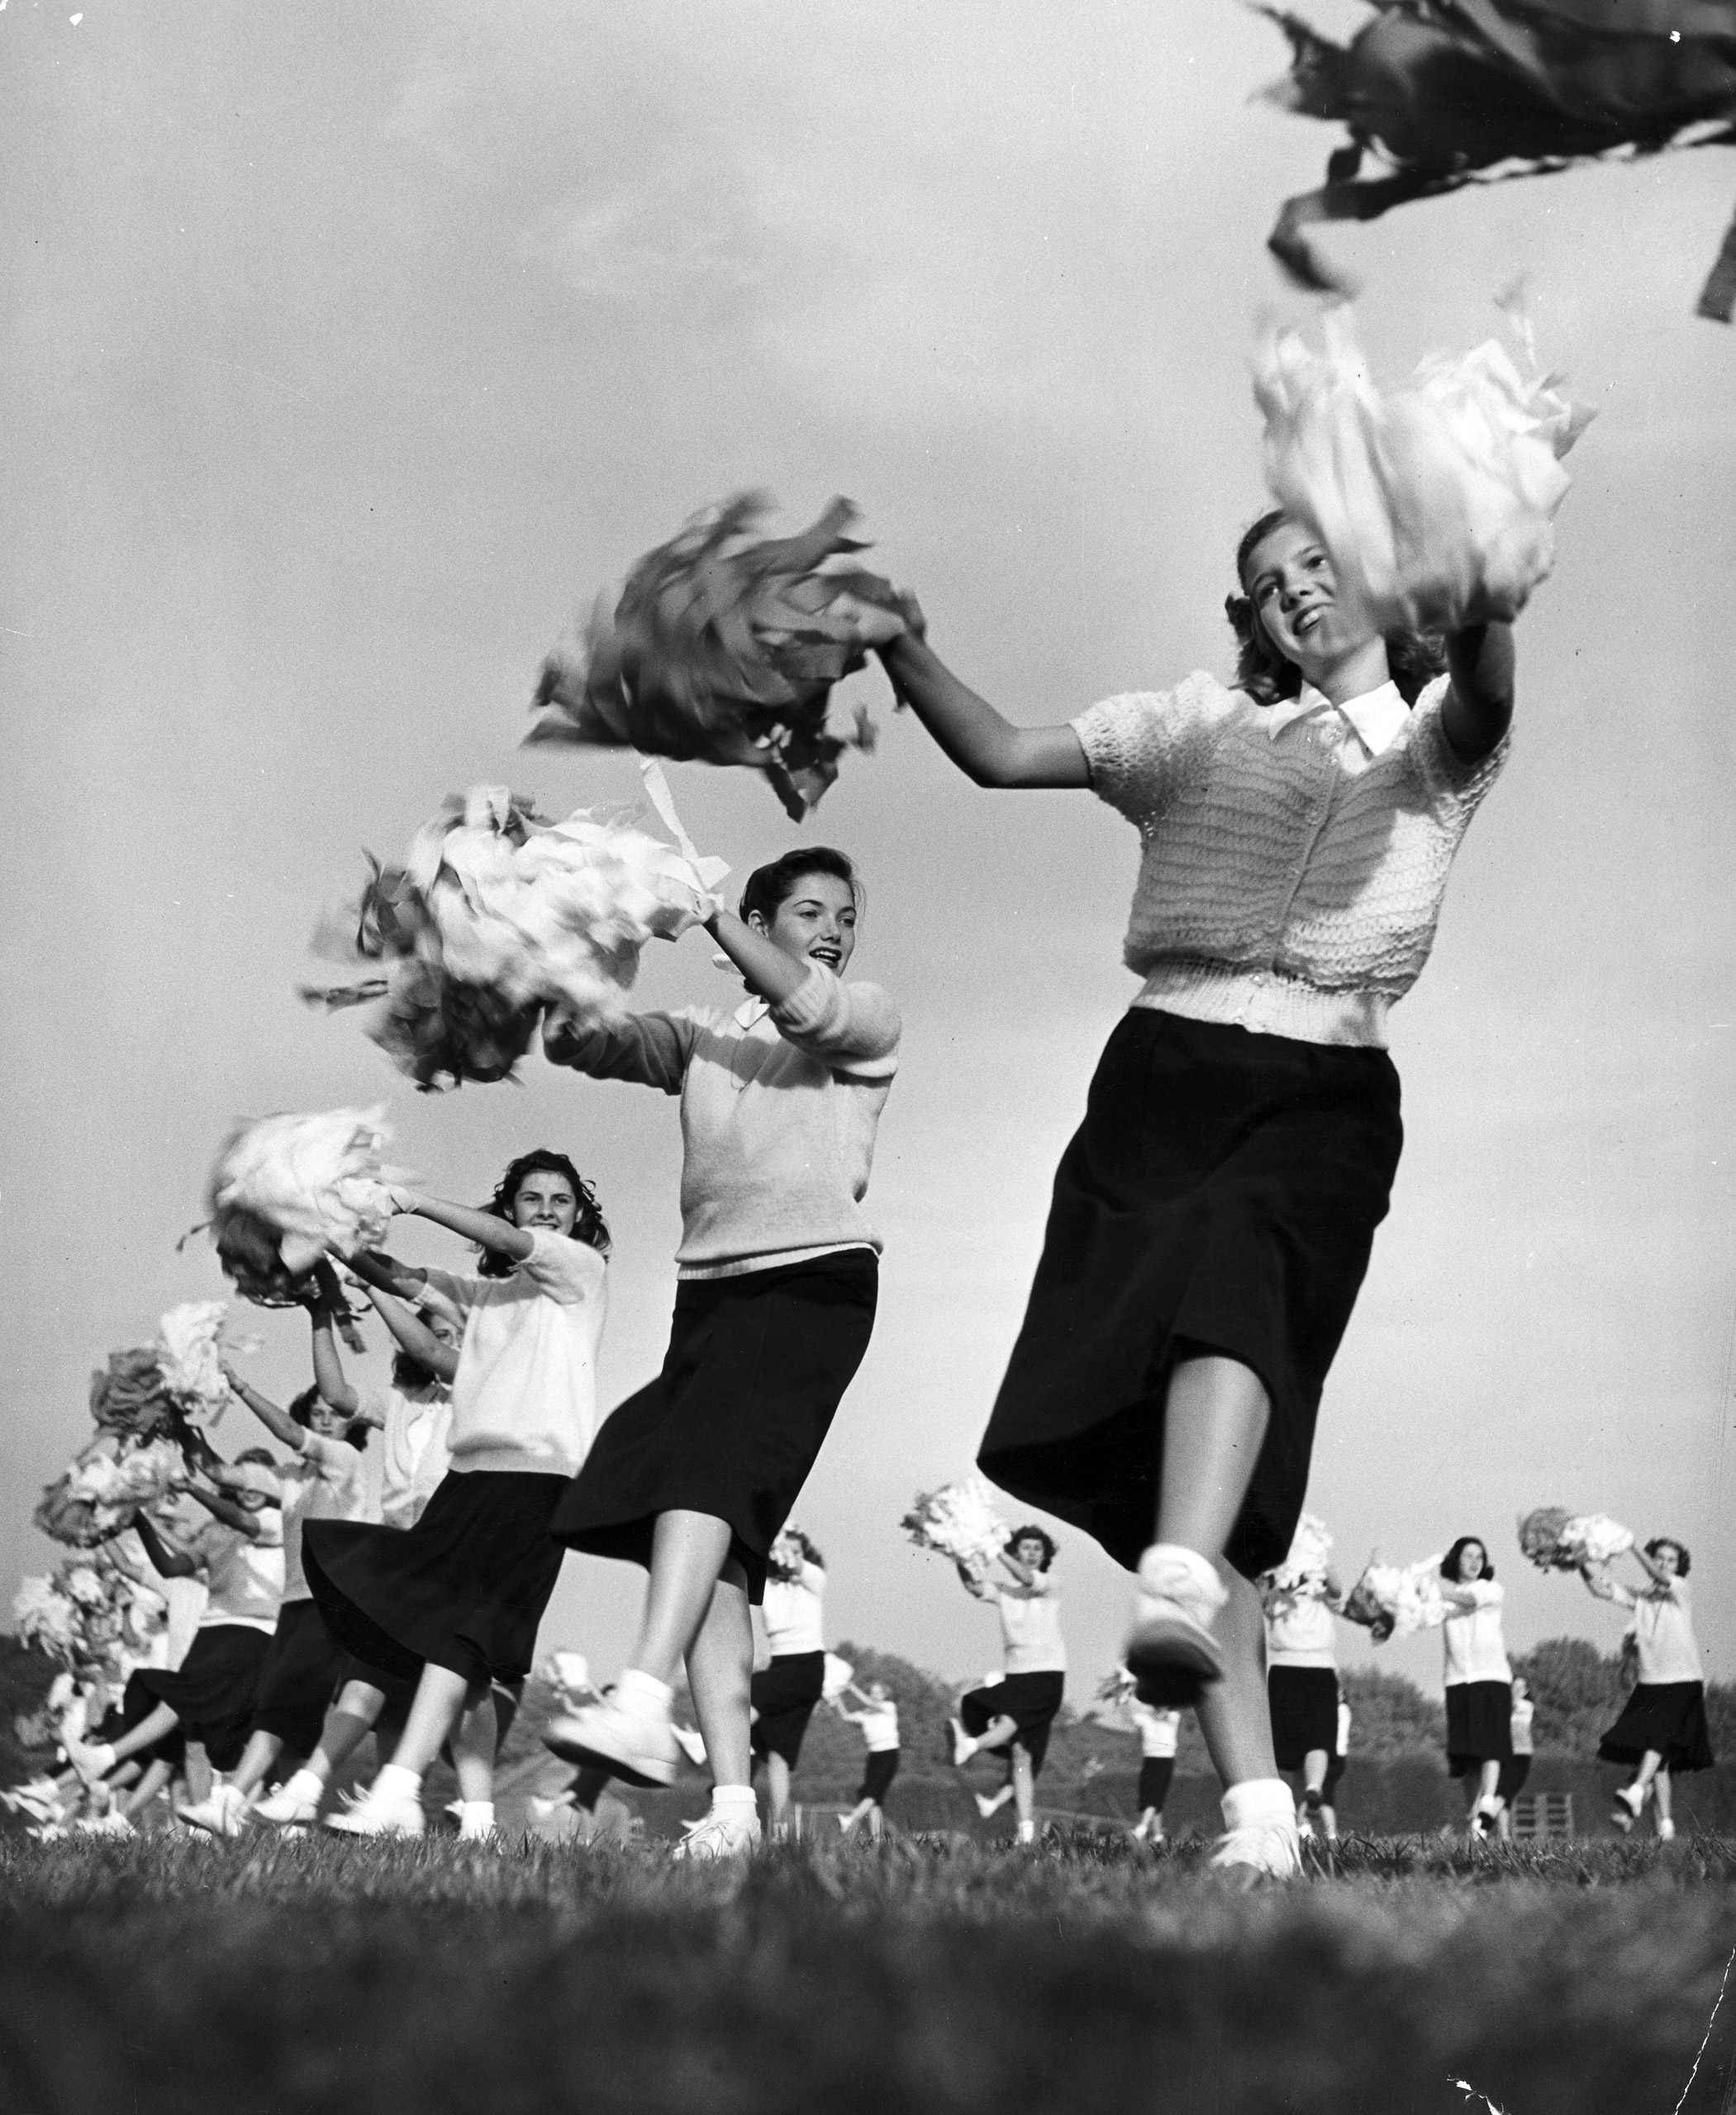 Sixty high school cheerleaders with crepe-paper pompons whip up football spirit, 1947.